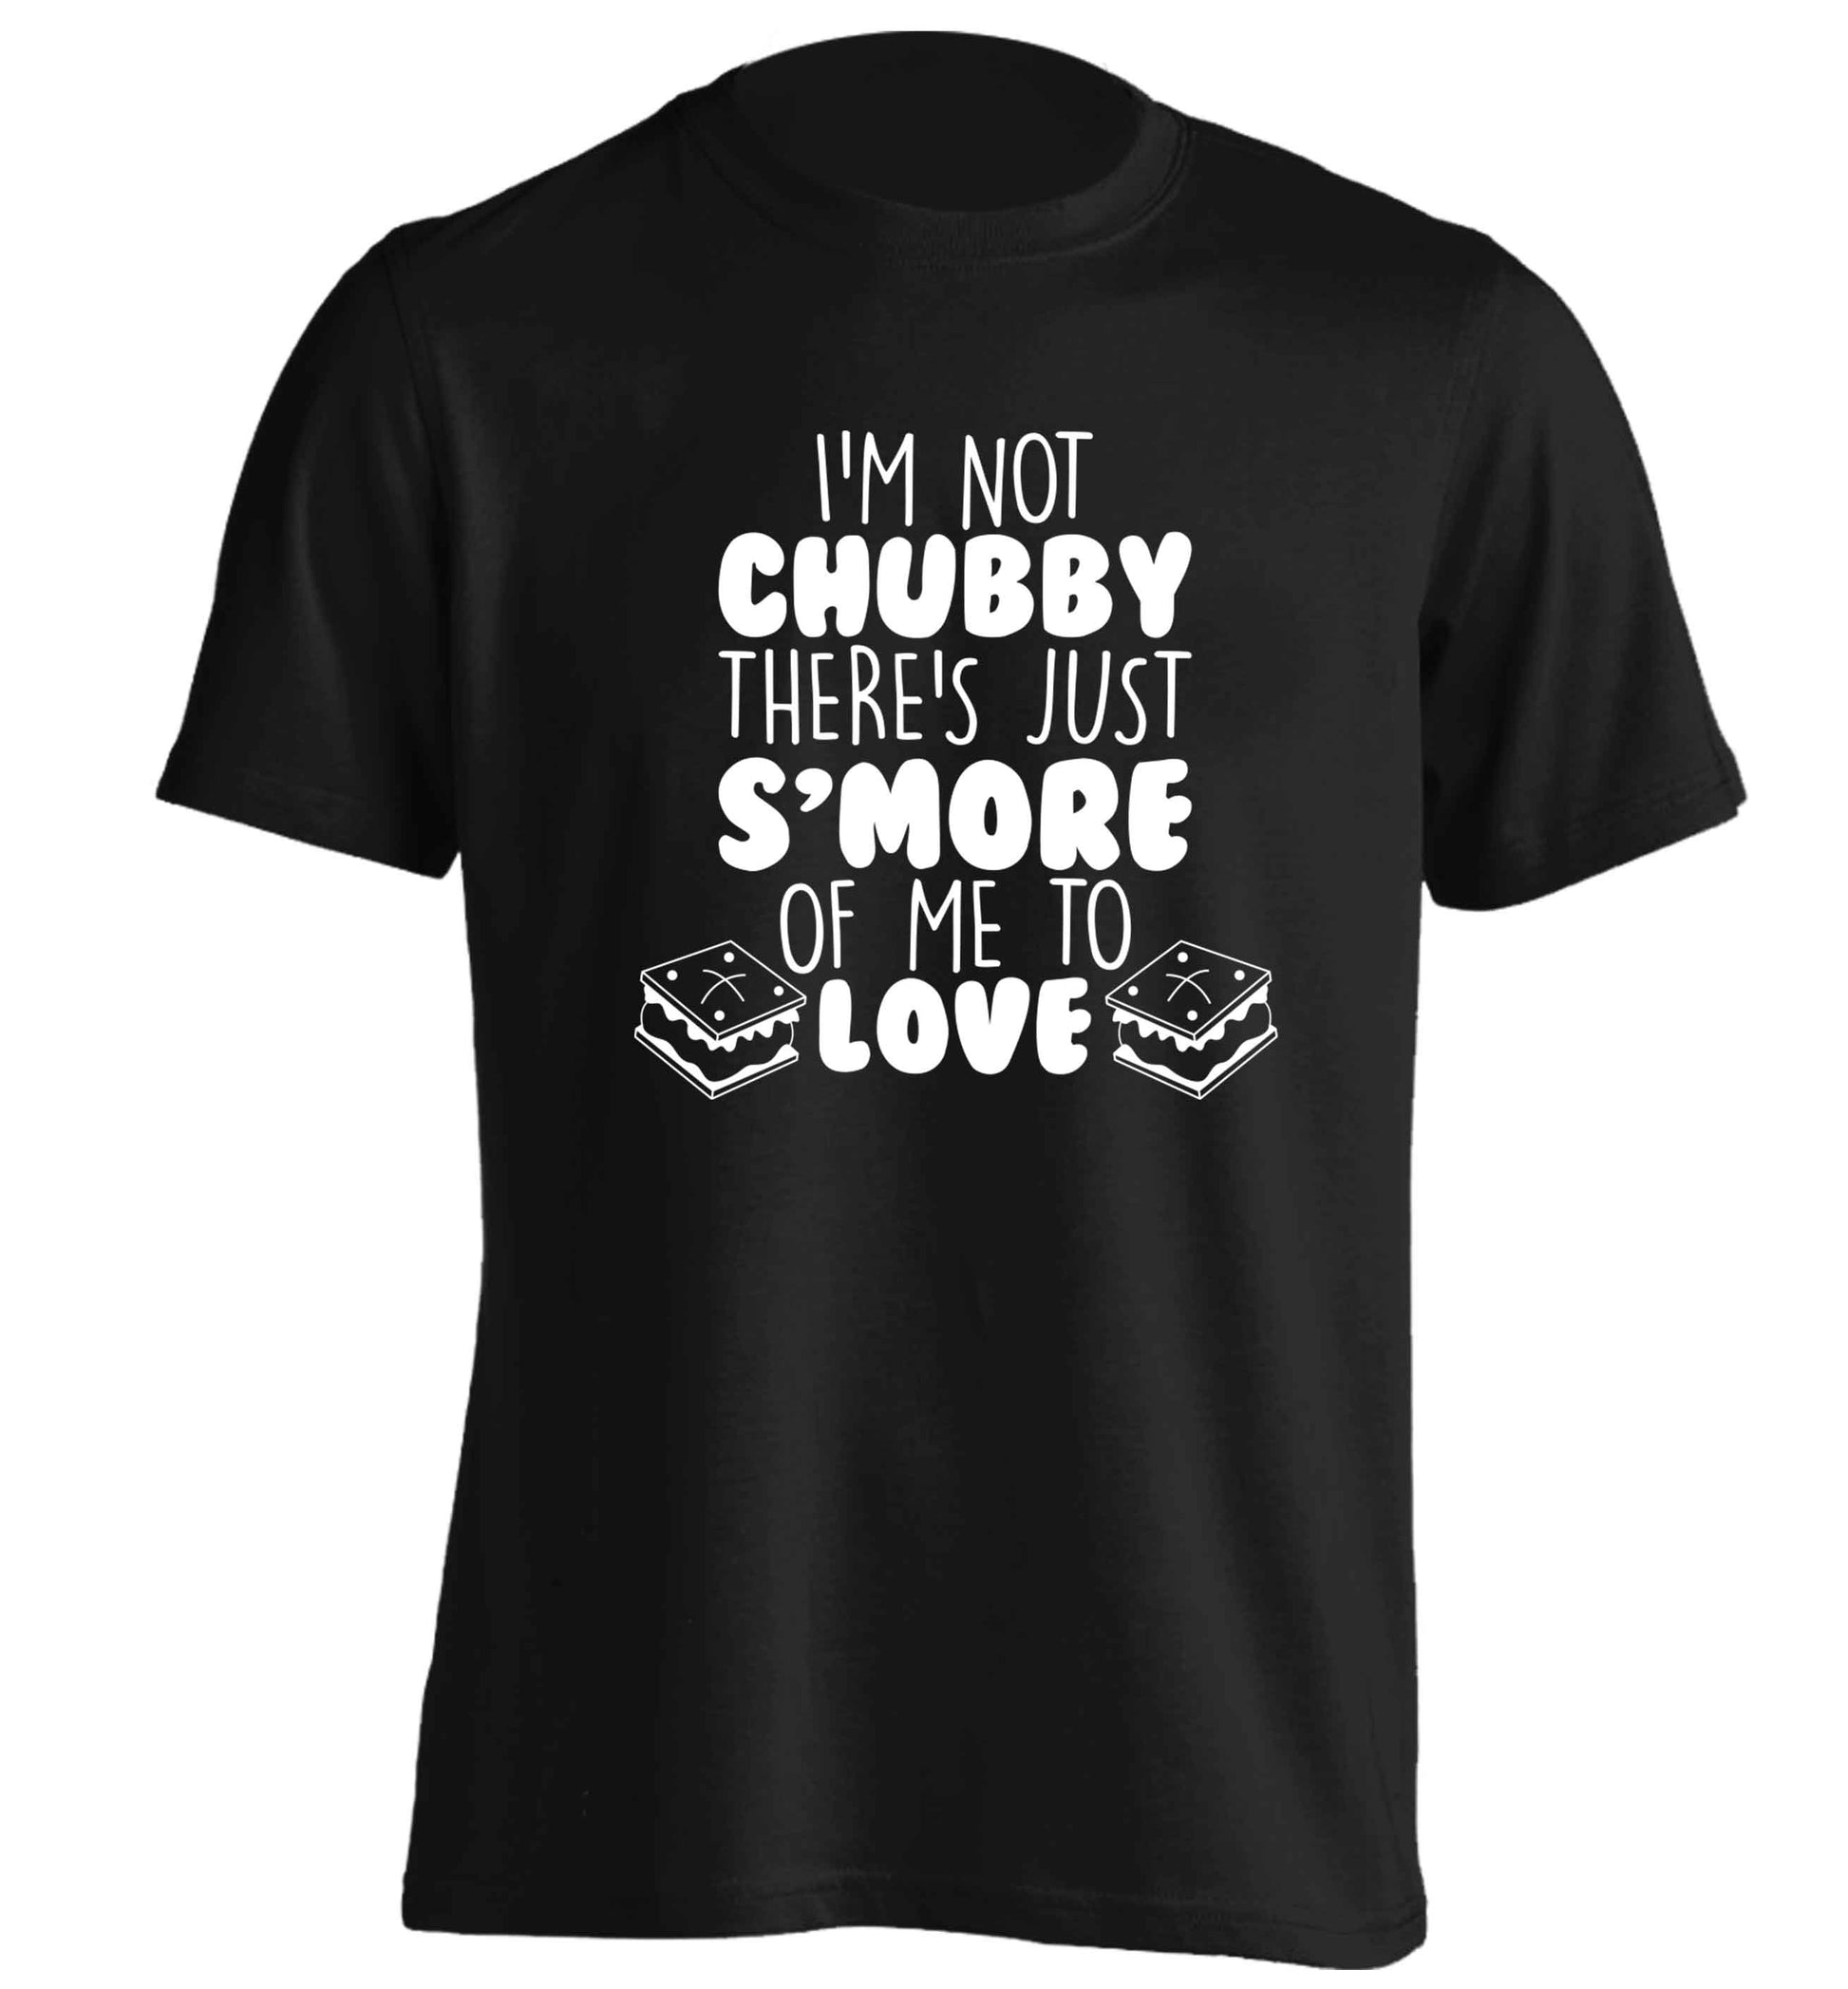 I'm not chubby there's just s'more of me to love adults unisex black Tshirt 2XL